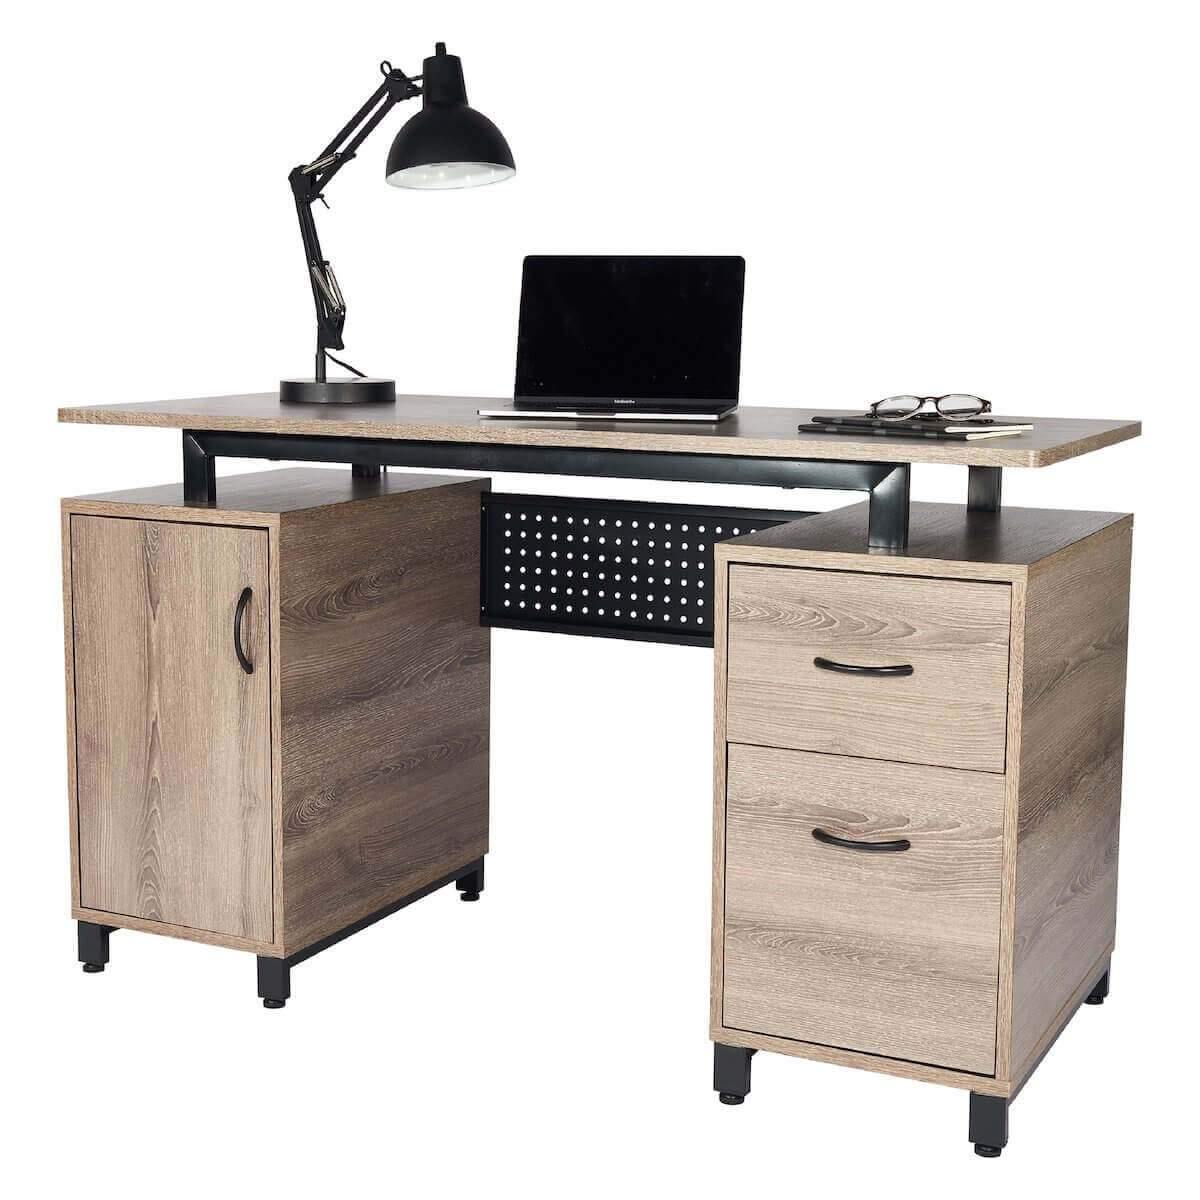 Techni Mobili Gray Computer Desk with Storage RTA-0054-GRY with Computer